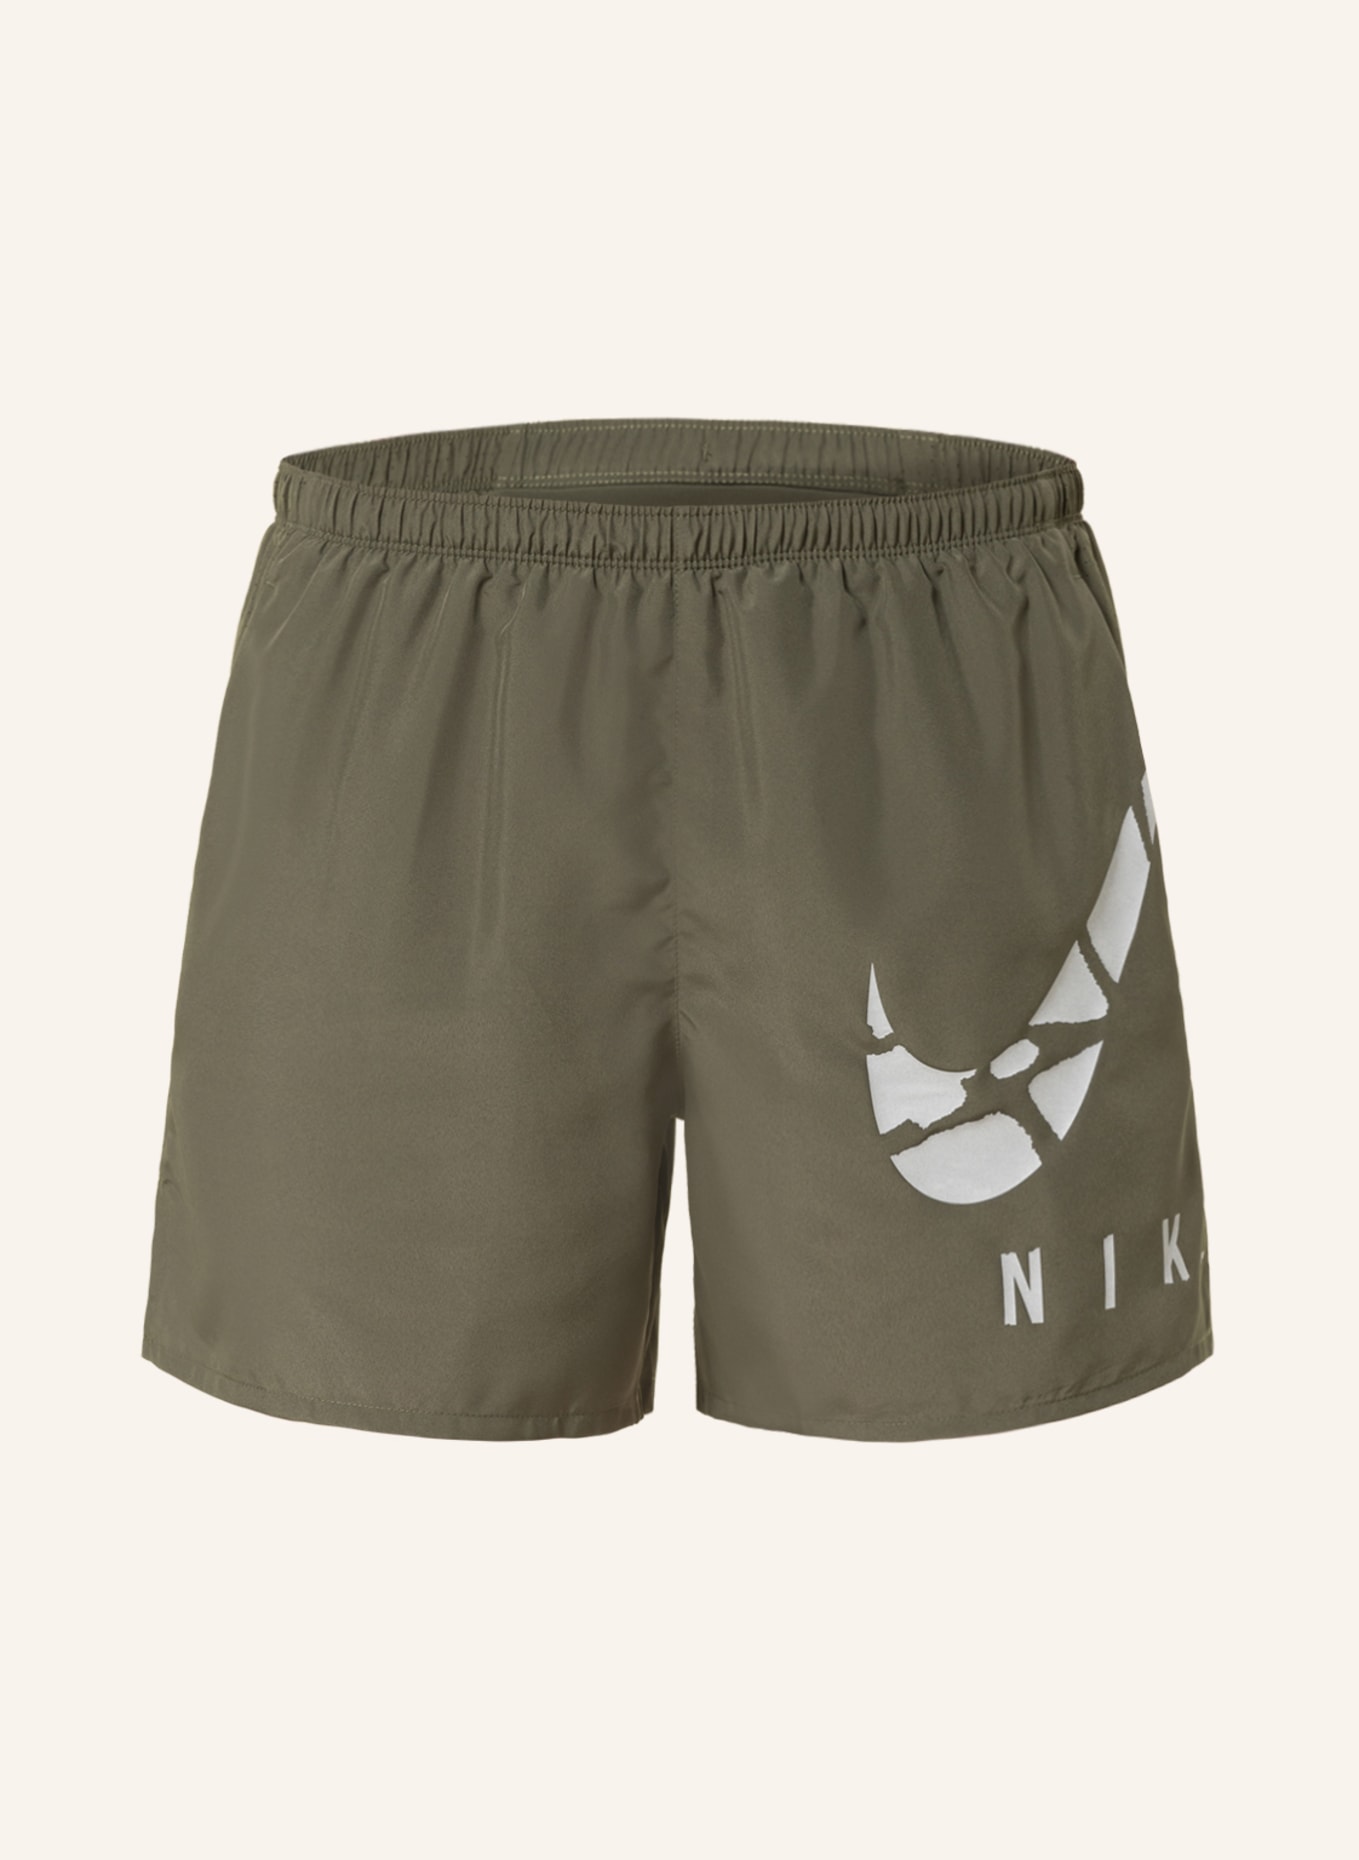 Nike 2-in-1 running shorts DRI-FIT CHALLENGER RUN DIVISION, Color: OLIVE (Image 1)